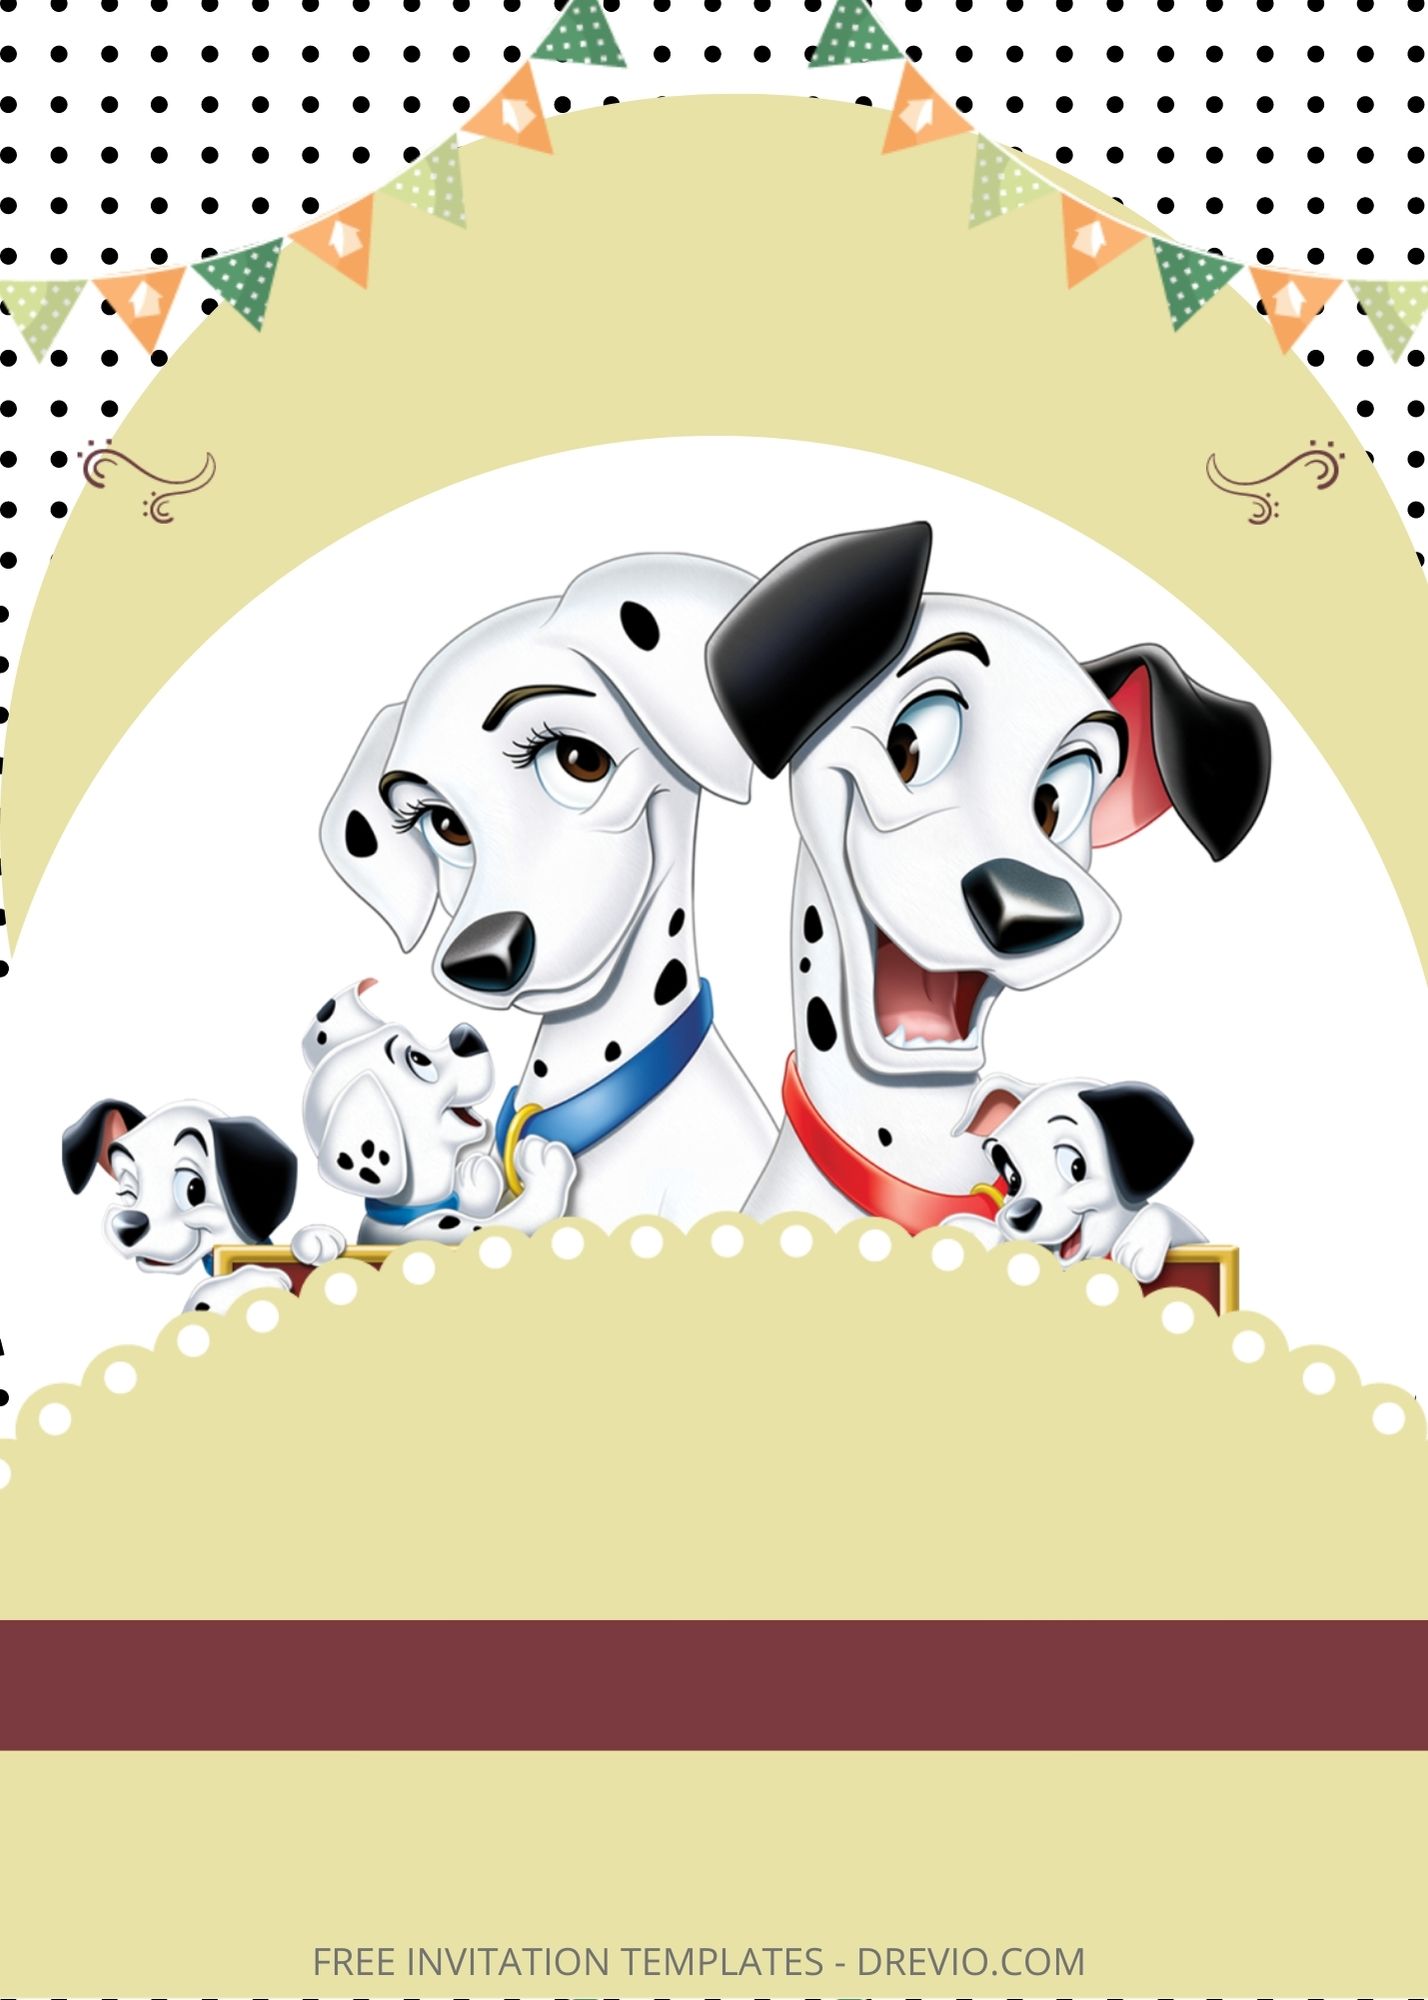 Blank Get Together Dalmatian Canva Birthday Invitation Templates Two